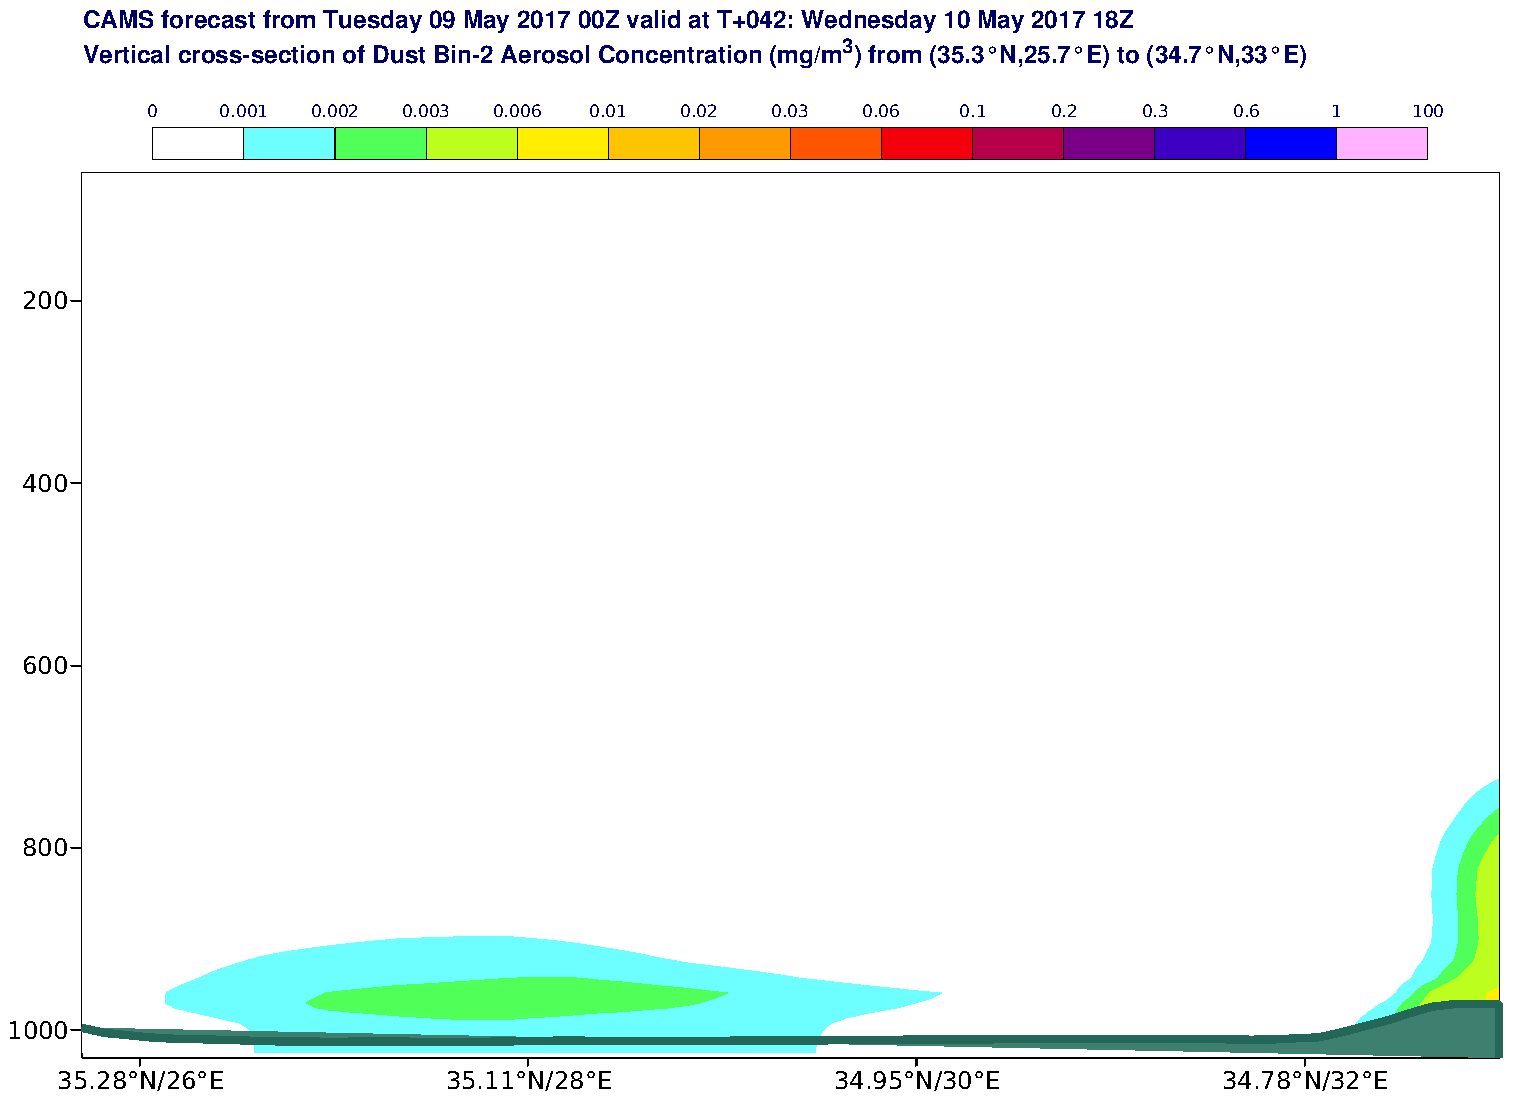 Vertical cross-section of Dust Bin-2 Aerosol Concentration (mg/m3) valid at T42 - 2017-05-10 18:00